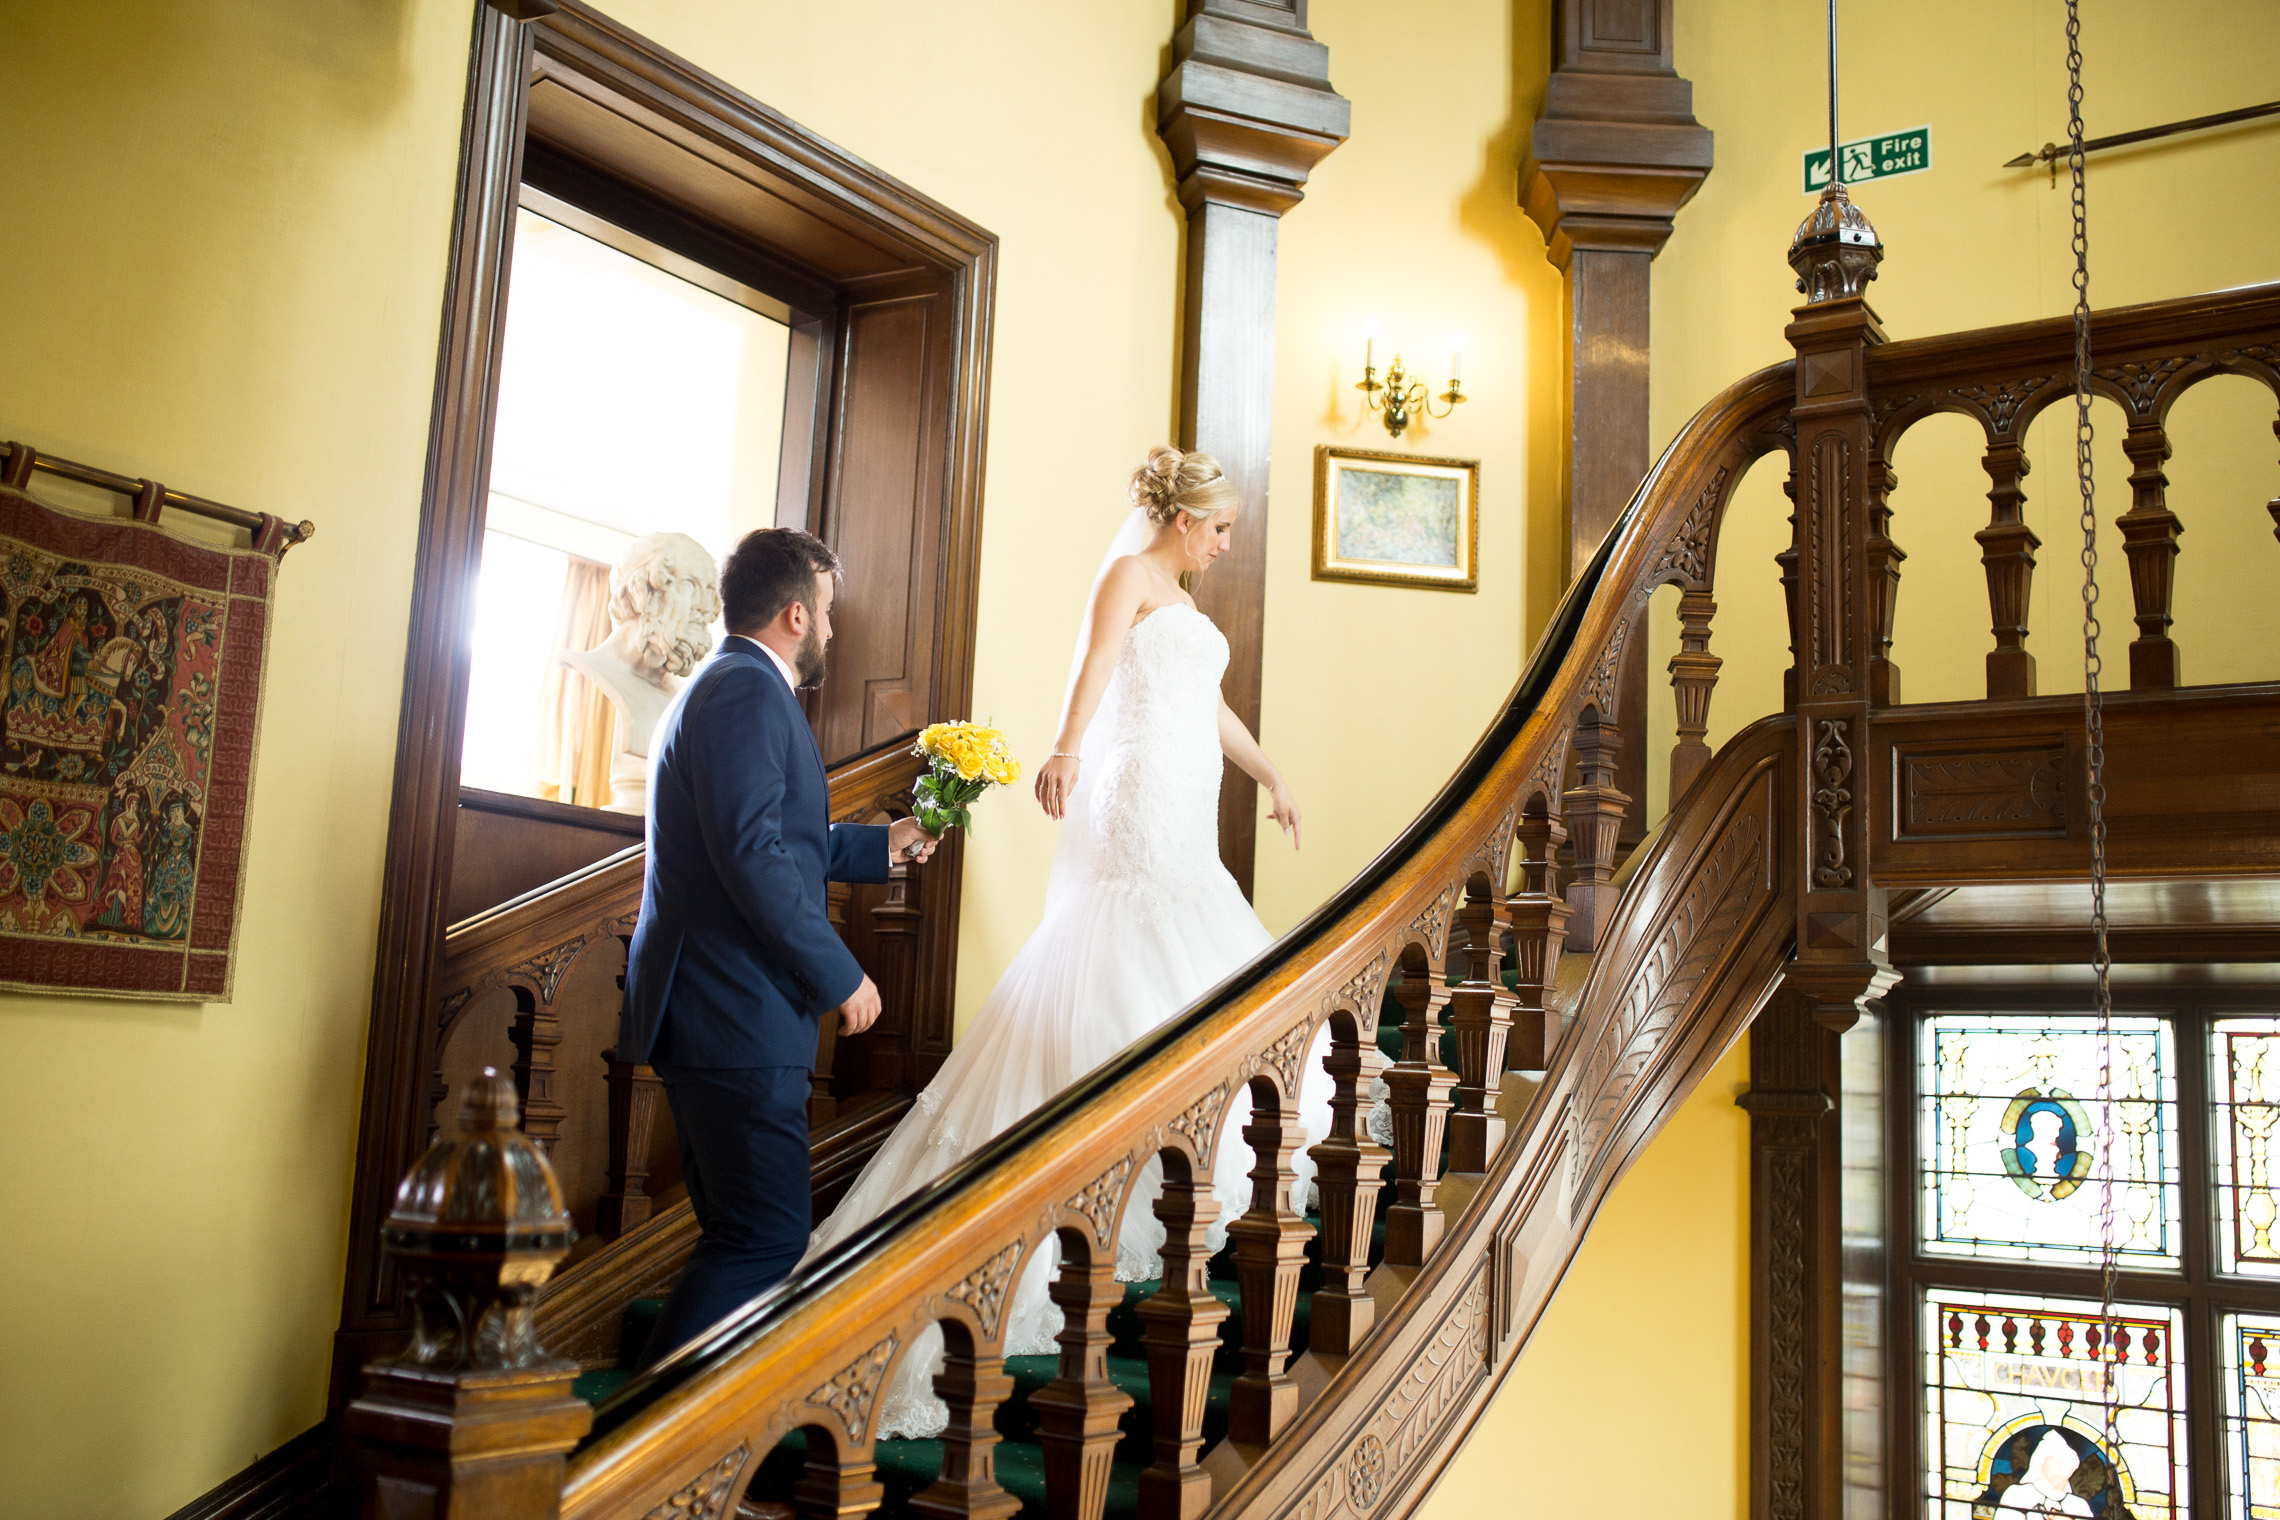 Bride and Groom up the stairs to the venue